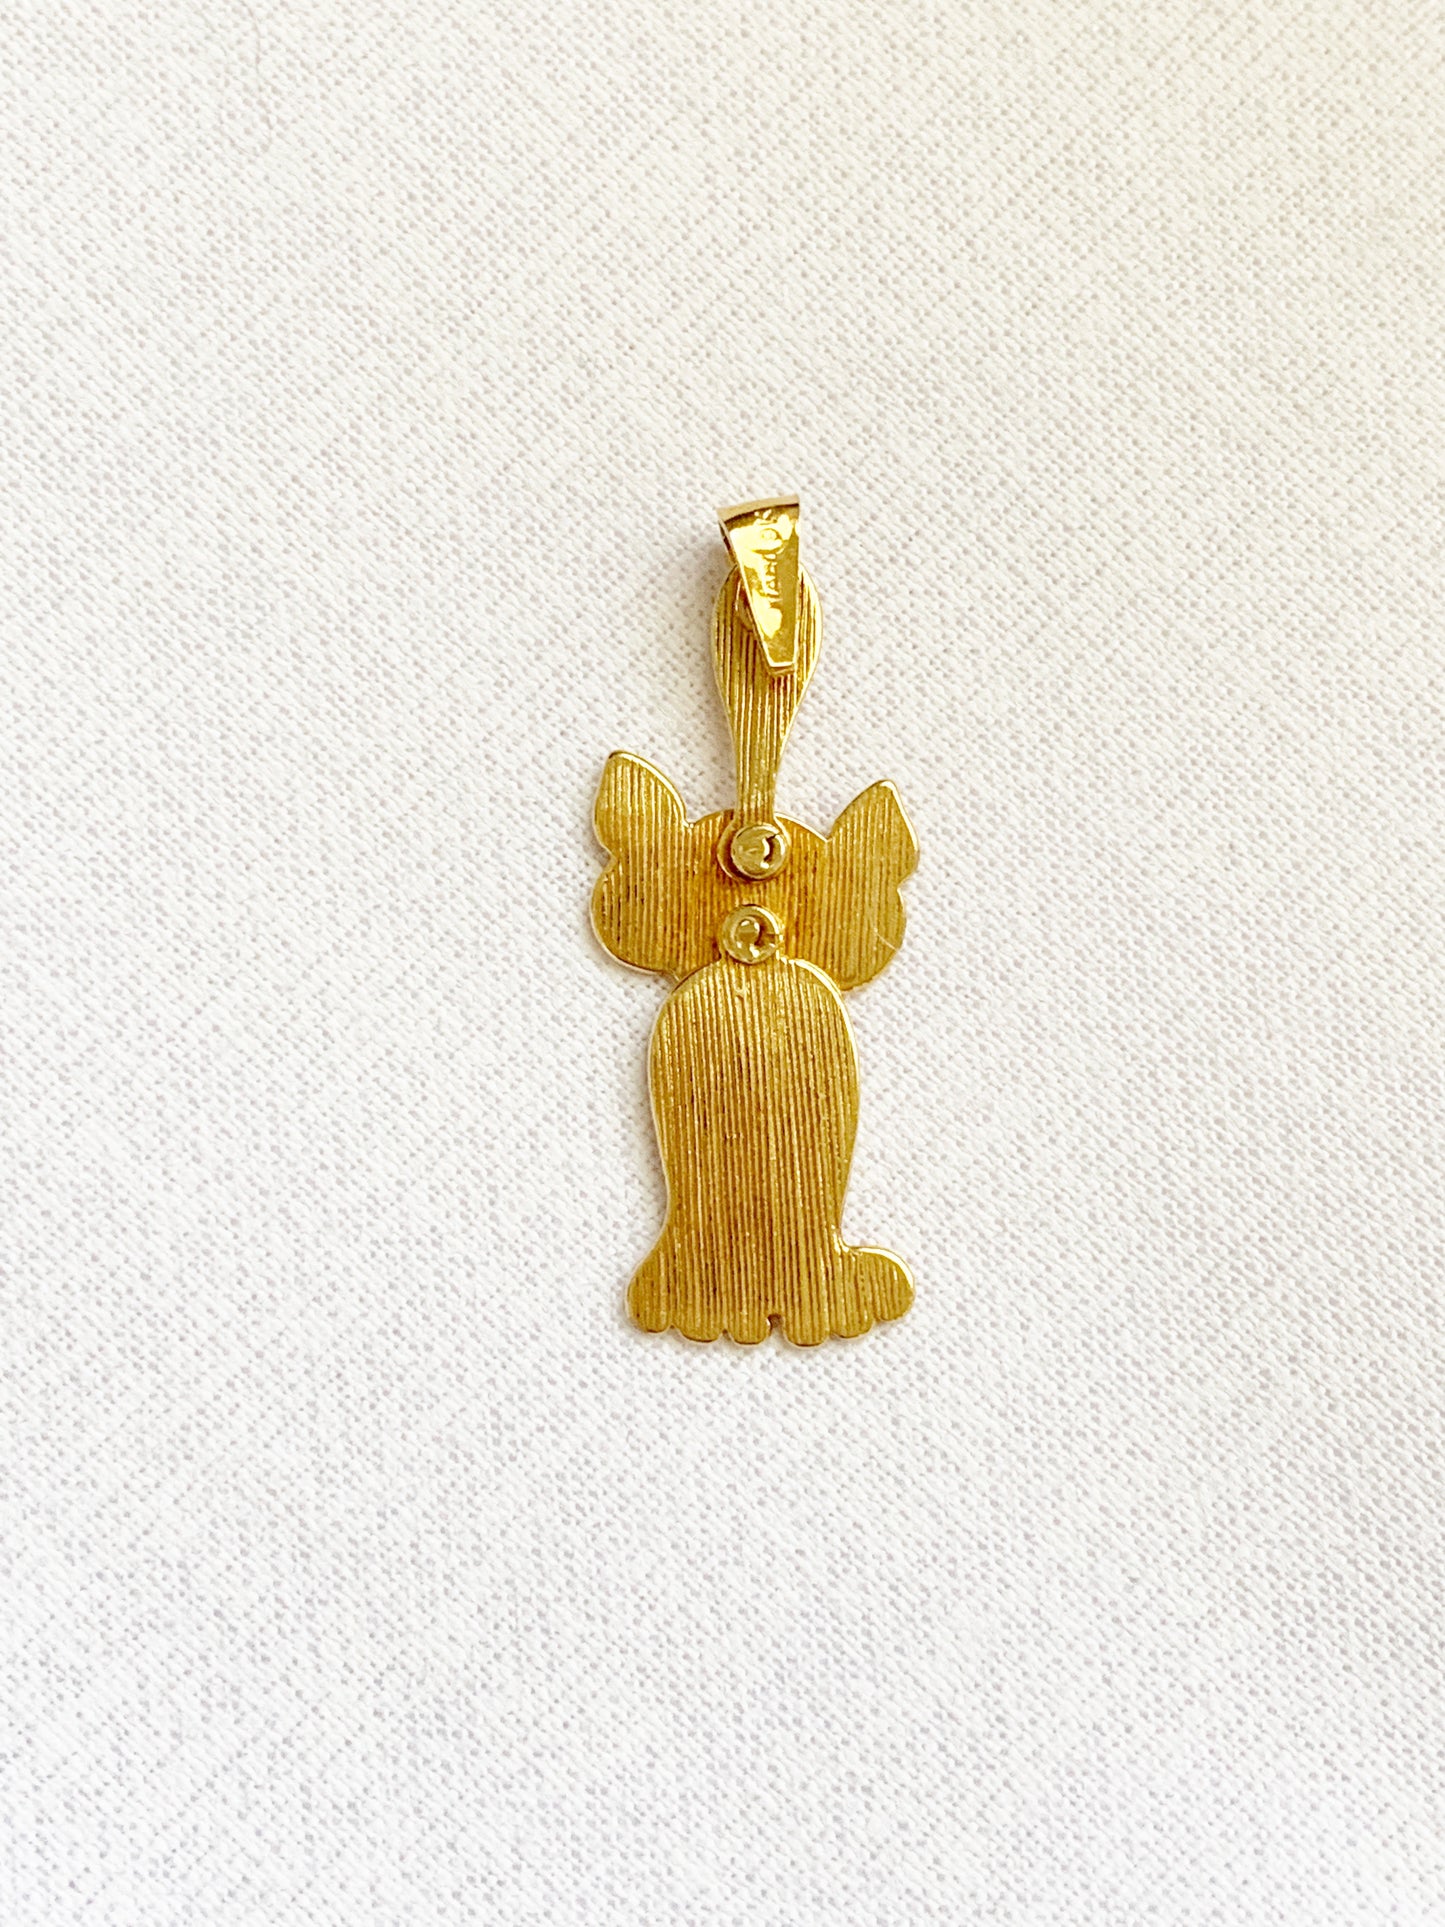 Vintage 9ct Gold Articulated Cat Pendant 1988